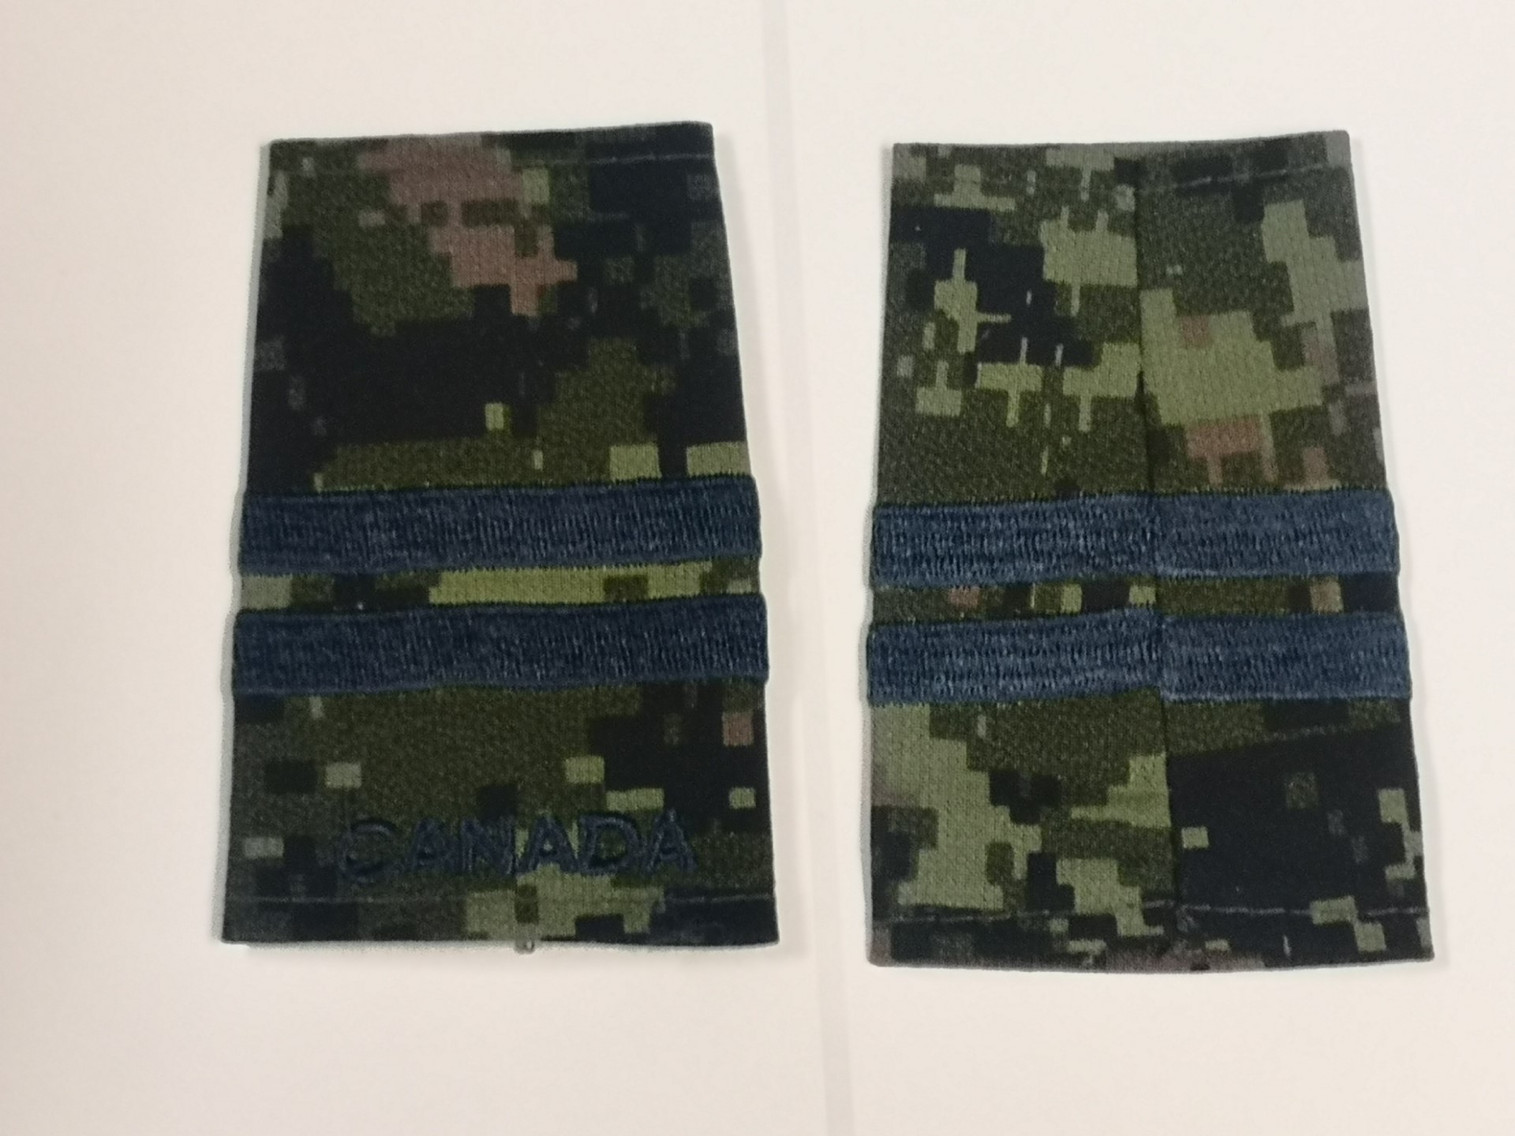 Canadian Armed Forces Cadpat Rank Epaulets Air Force - Captain